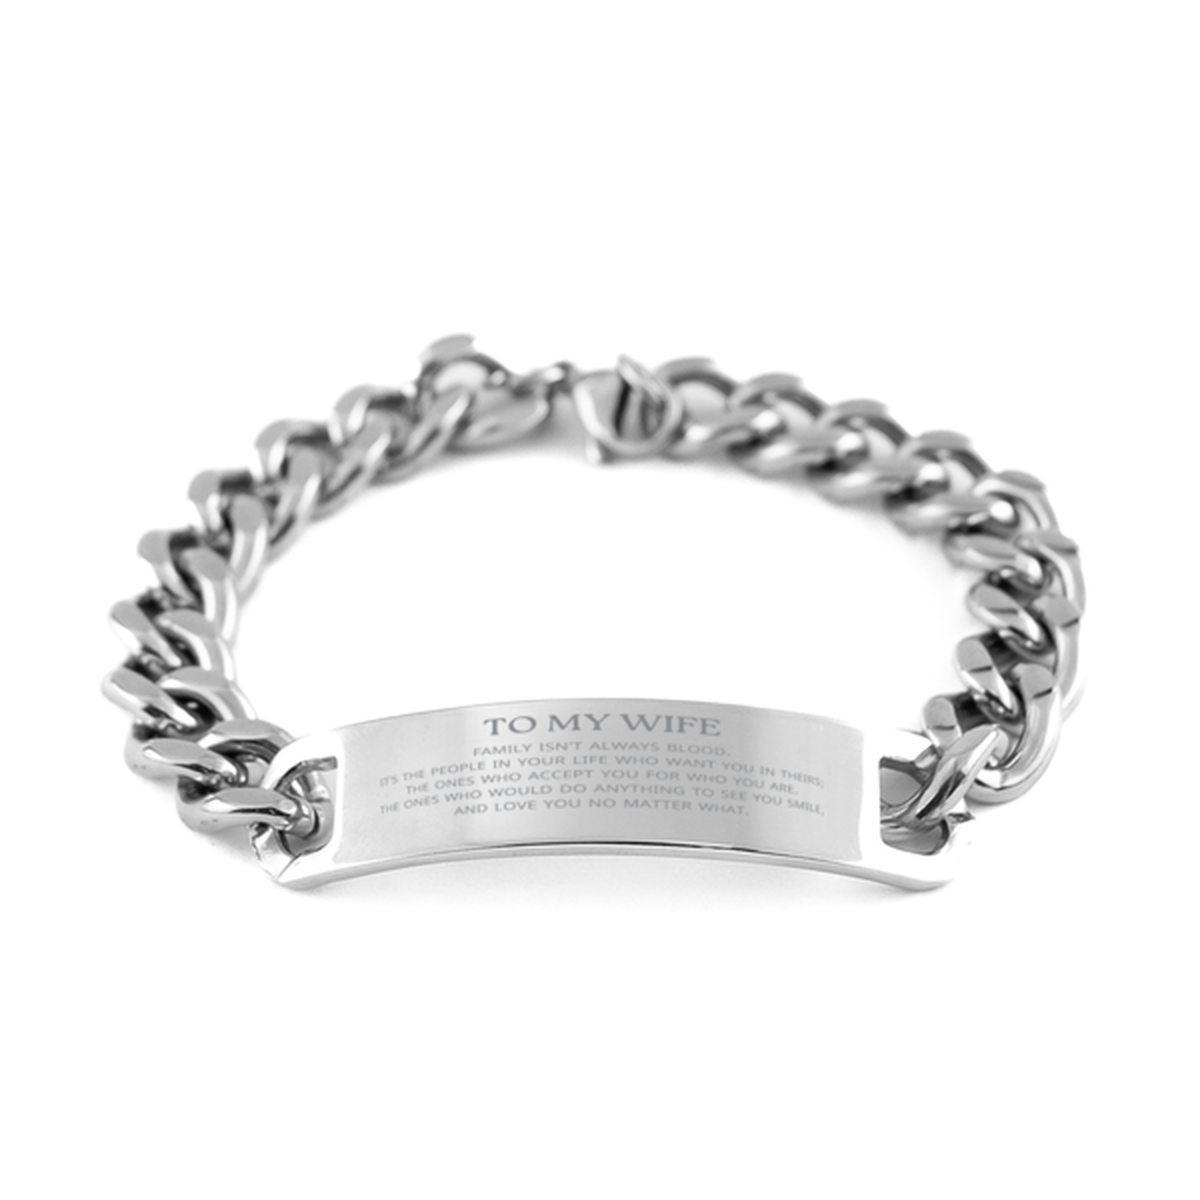 To My Wife Gifts, Family isn't always blood, Wife Cuban Chain Stainless Steel Bracelet, Birthday Christmas Unique Present For Wife